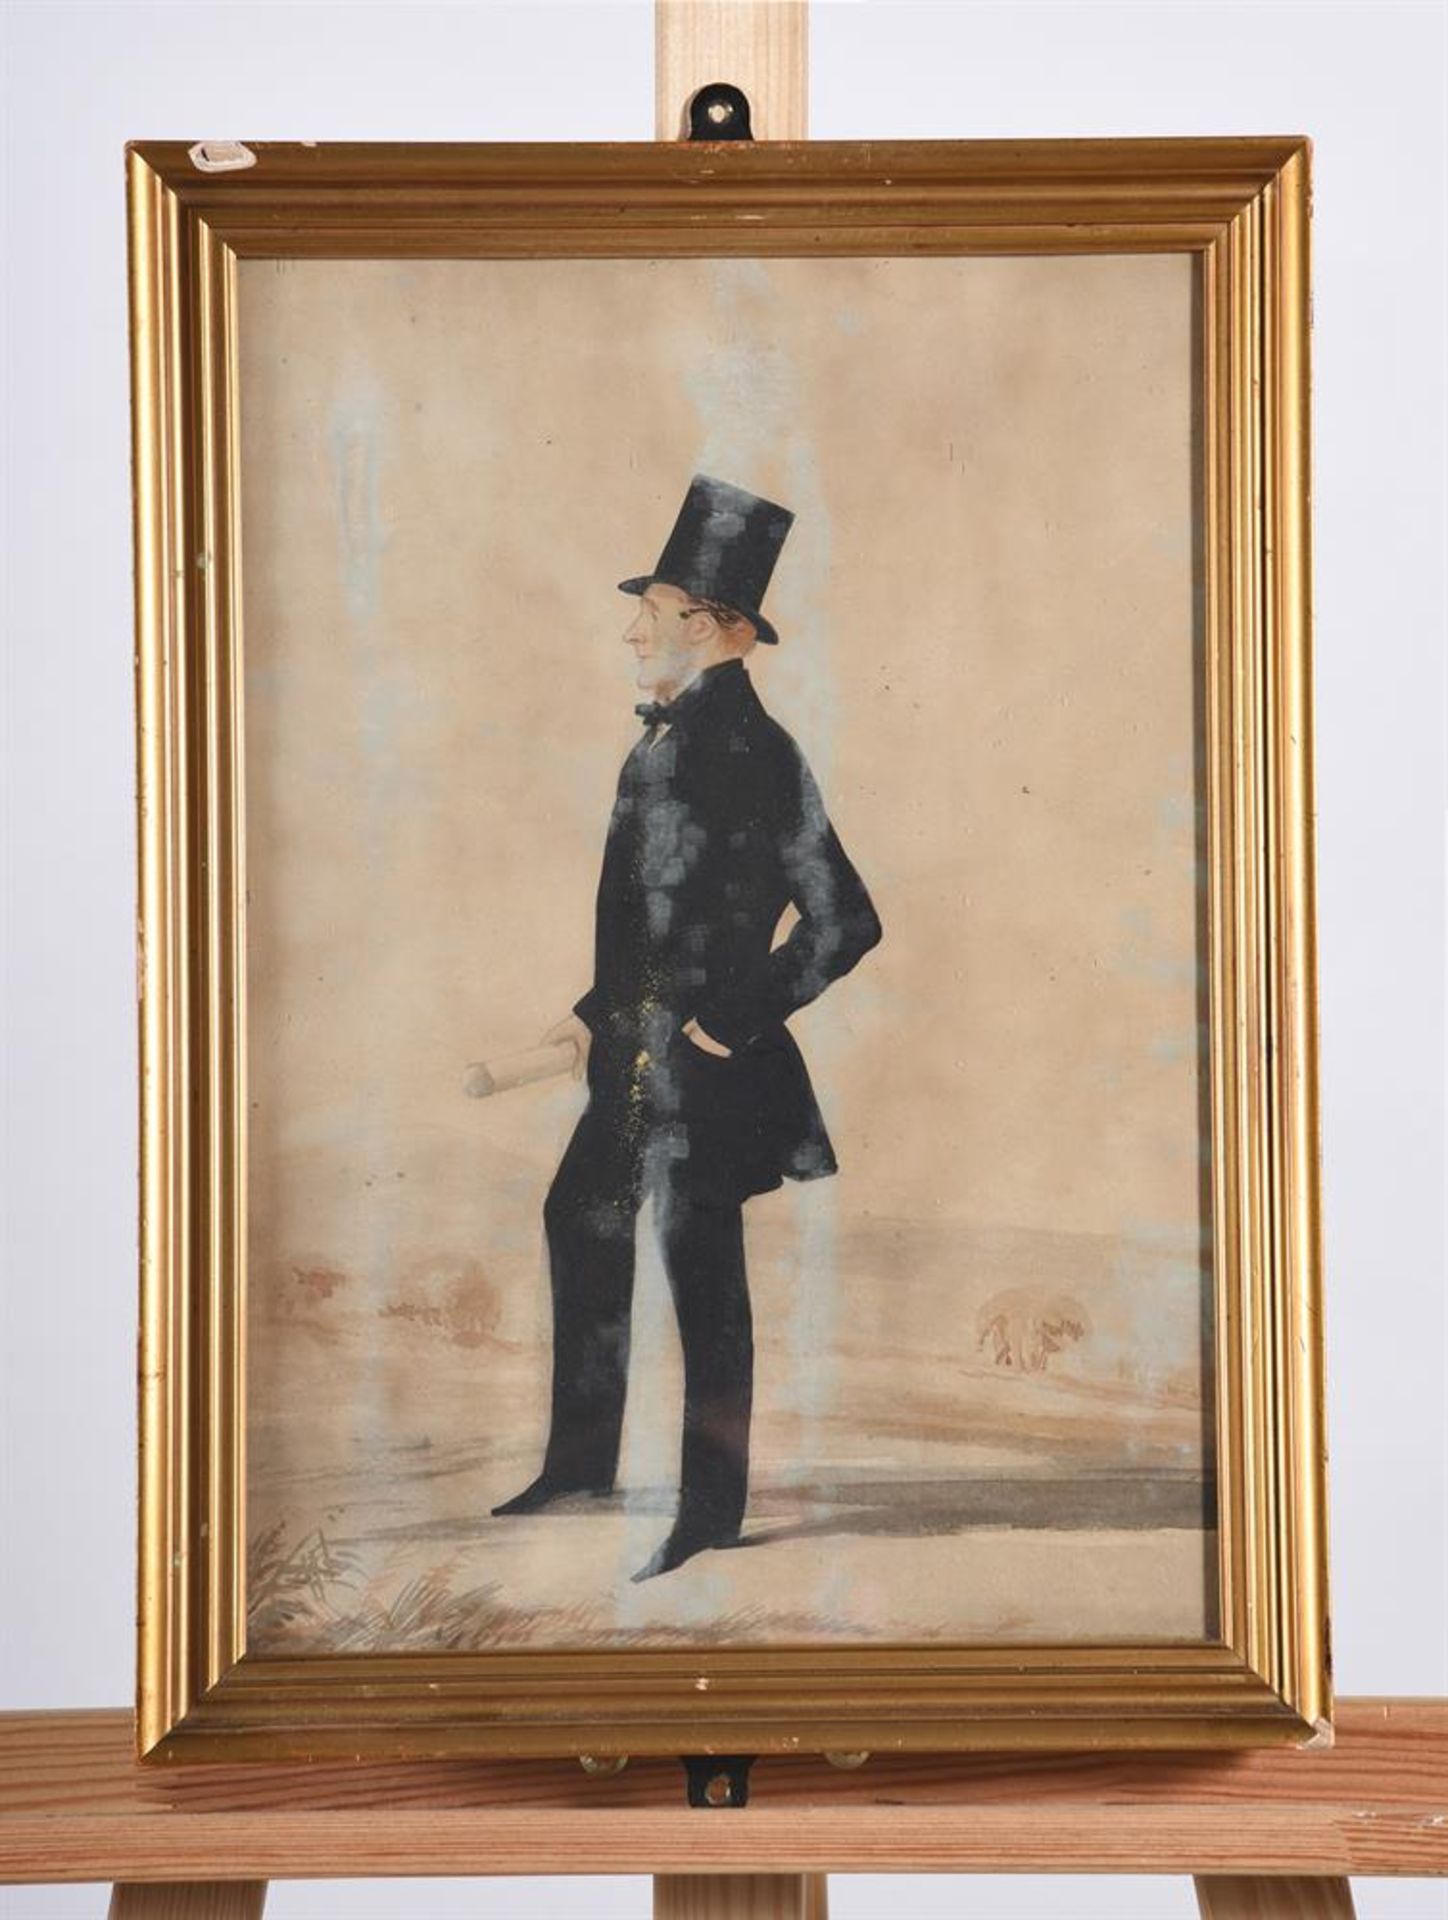 English School (19th century), Man in an overcoat - Image 5 of 6